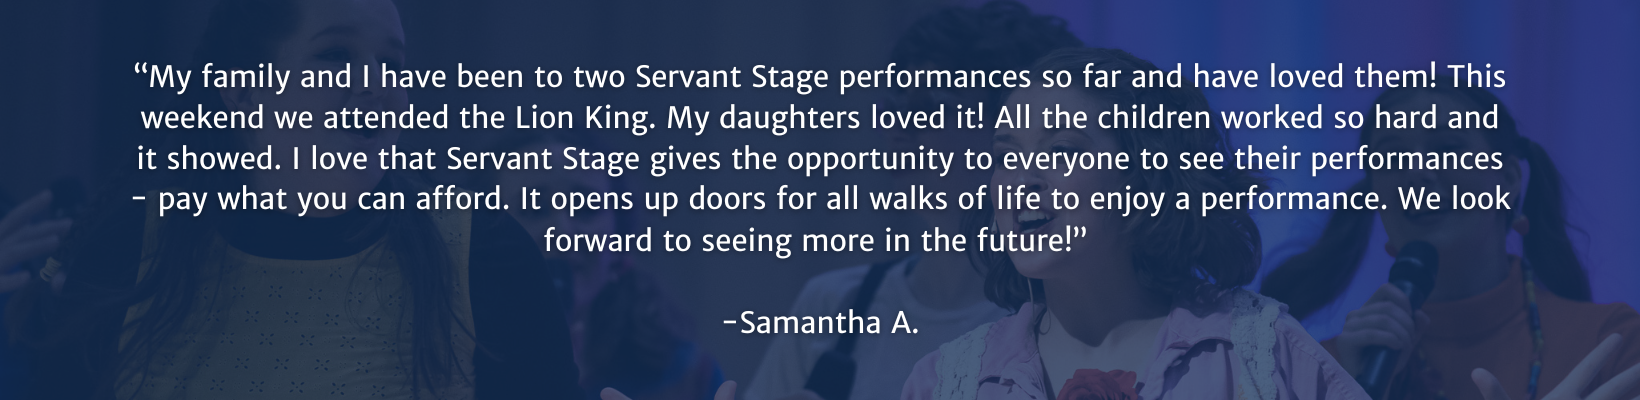 Servant Stage Review_Samantha A.